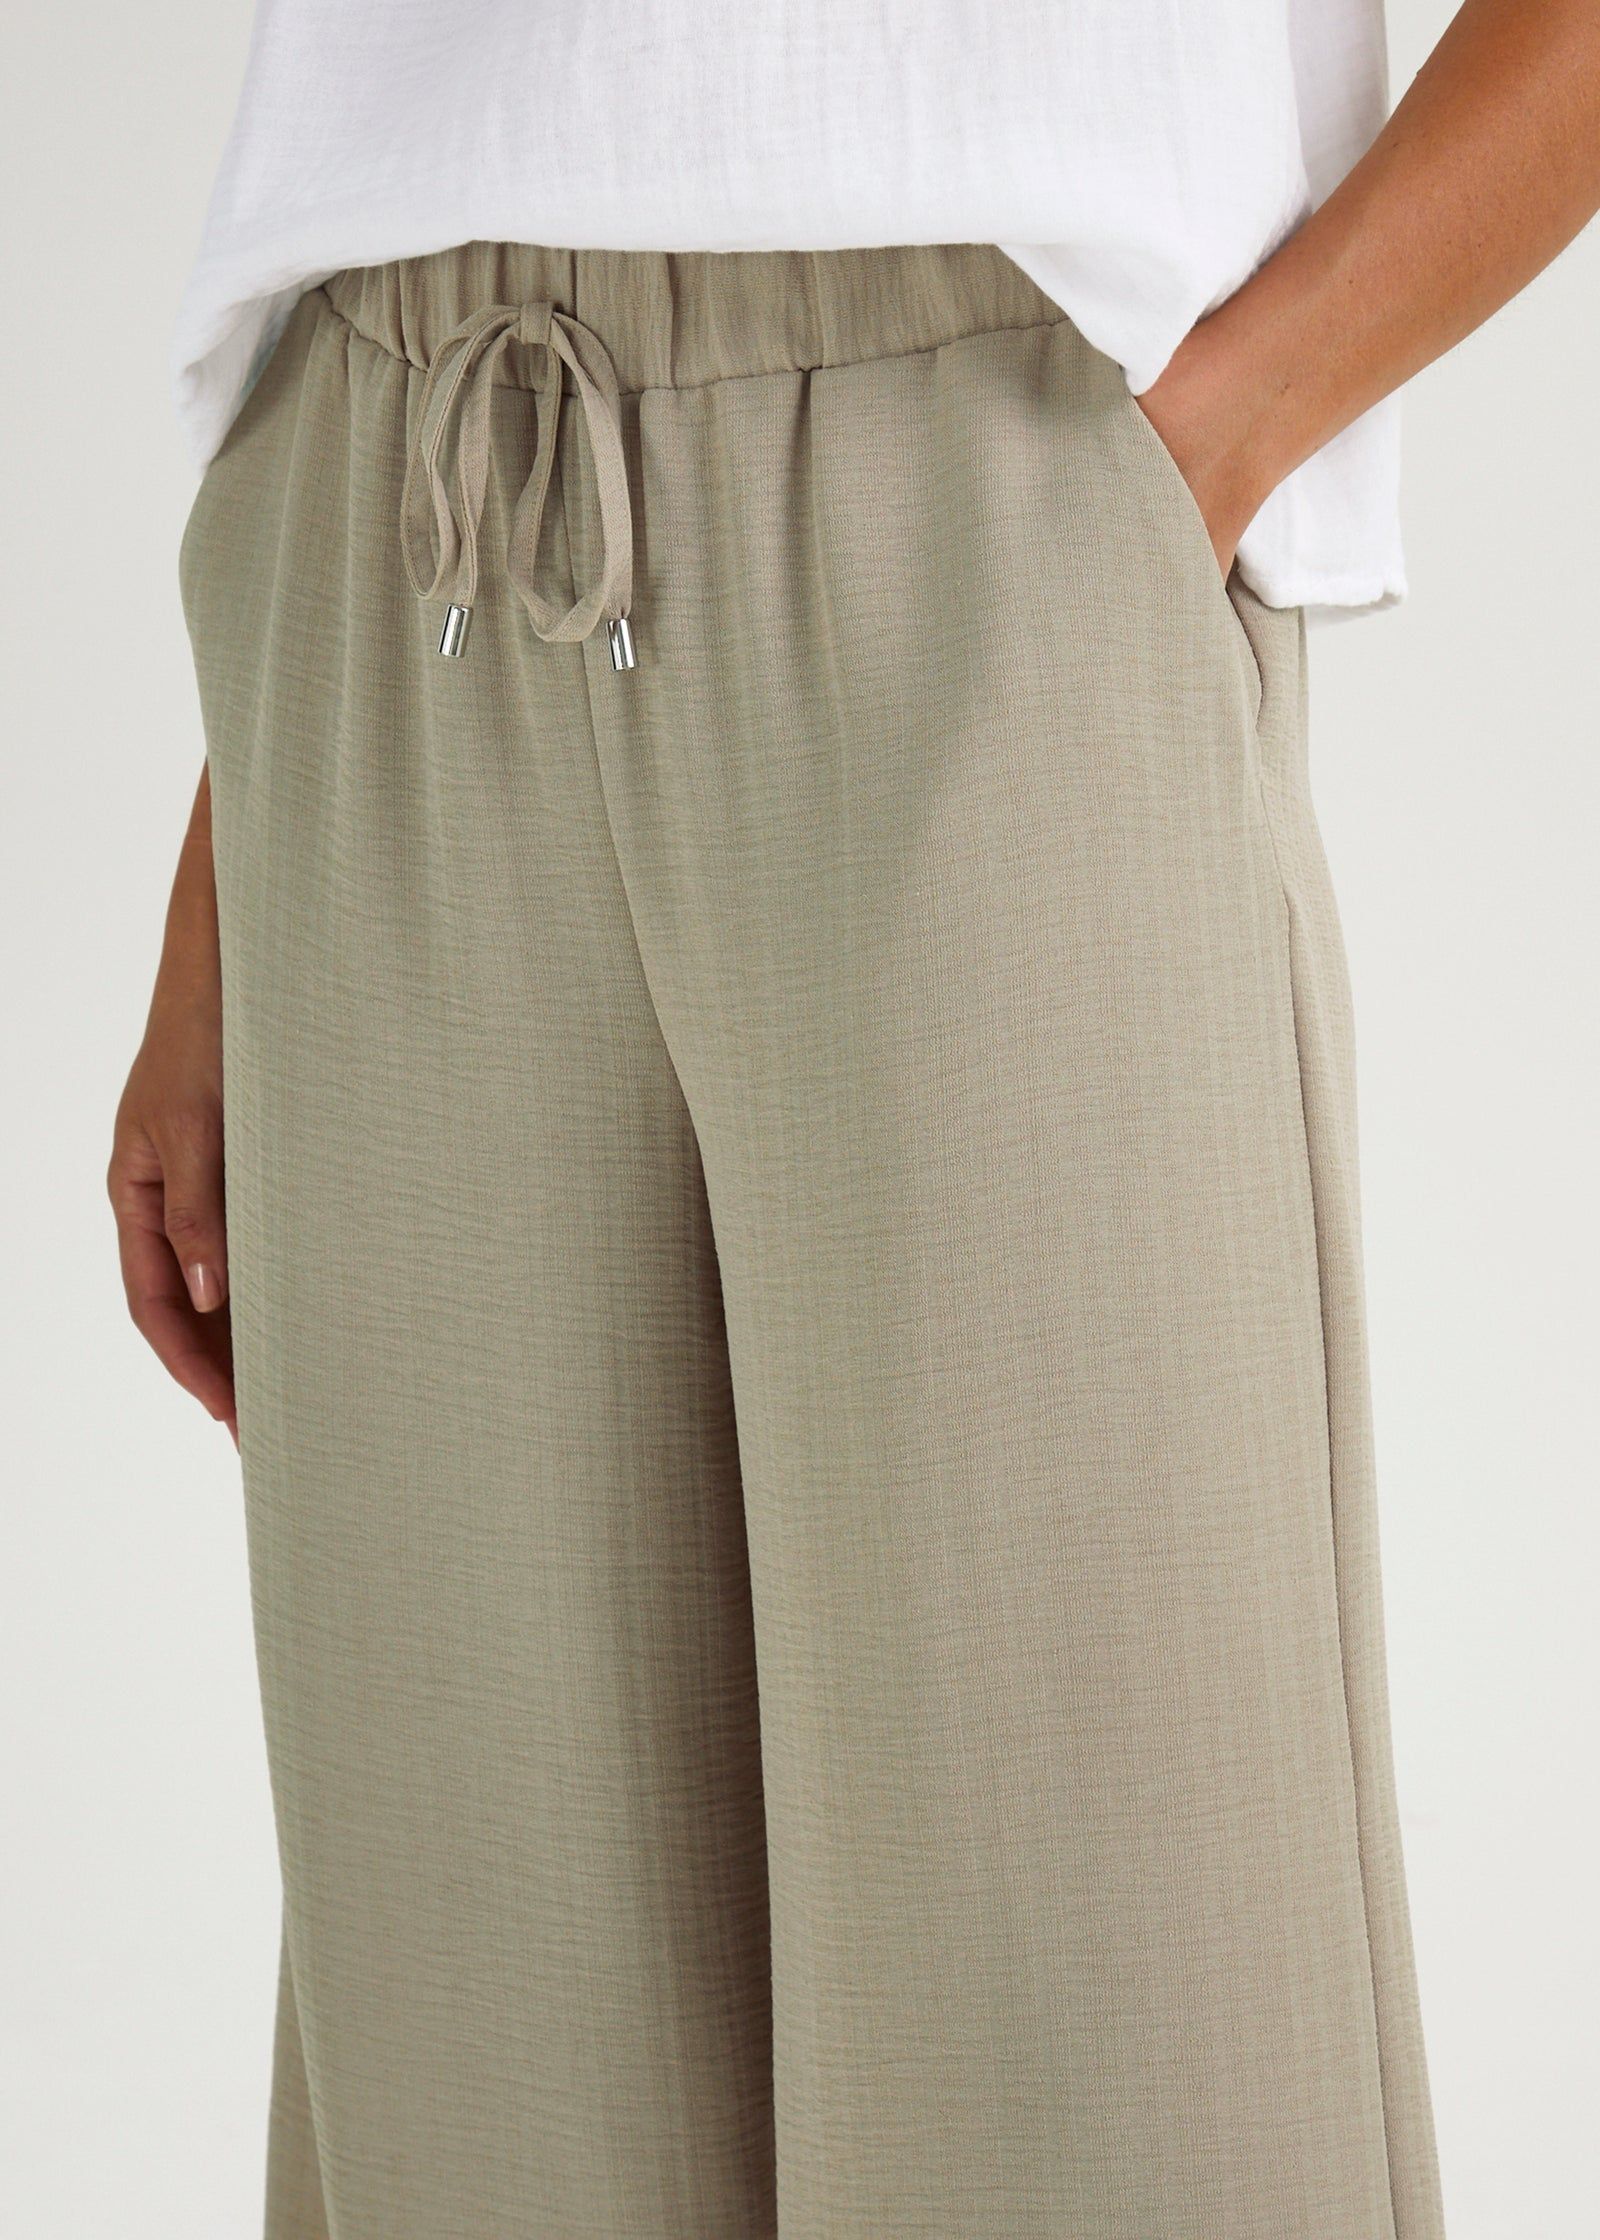 Buy Cropped Trousers Online